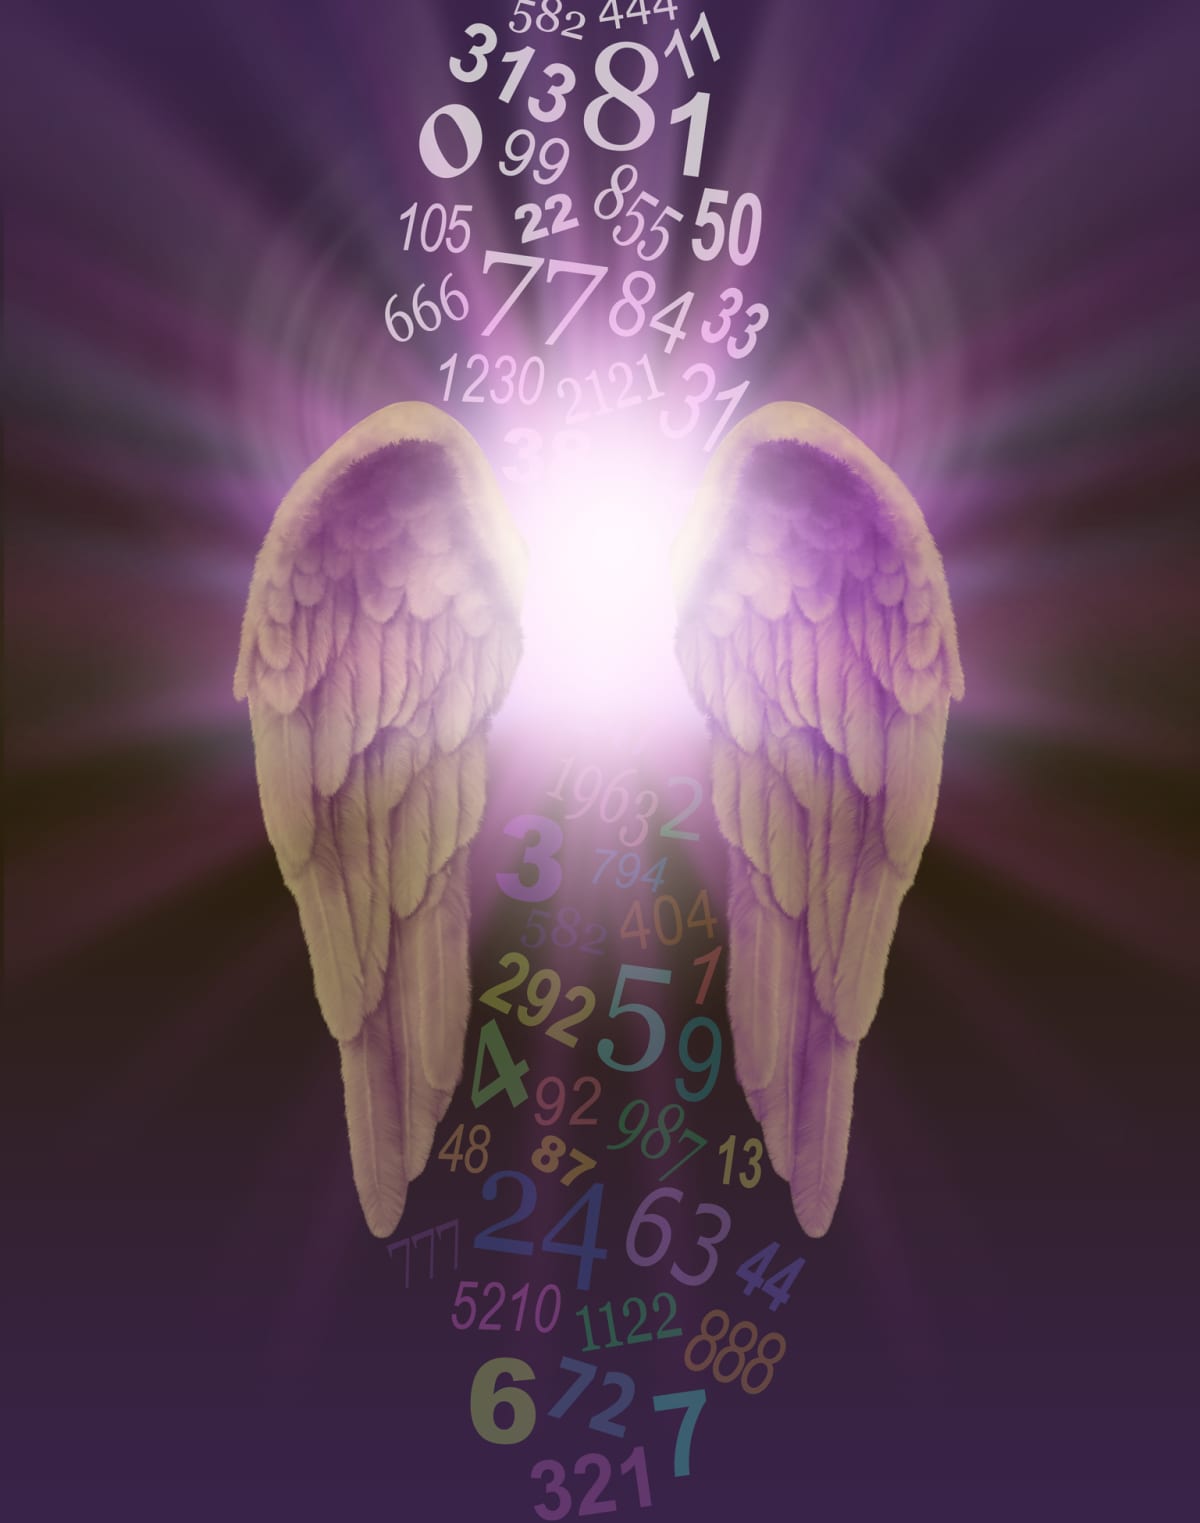 A pair of angel wings with burst of divine light behind and a stream of random numbers above and below appearing to be cleansed by the light on a dark purple background